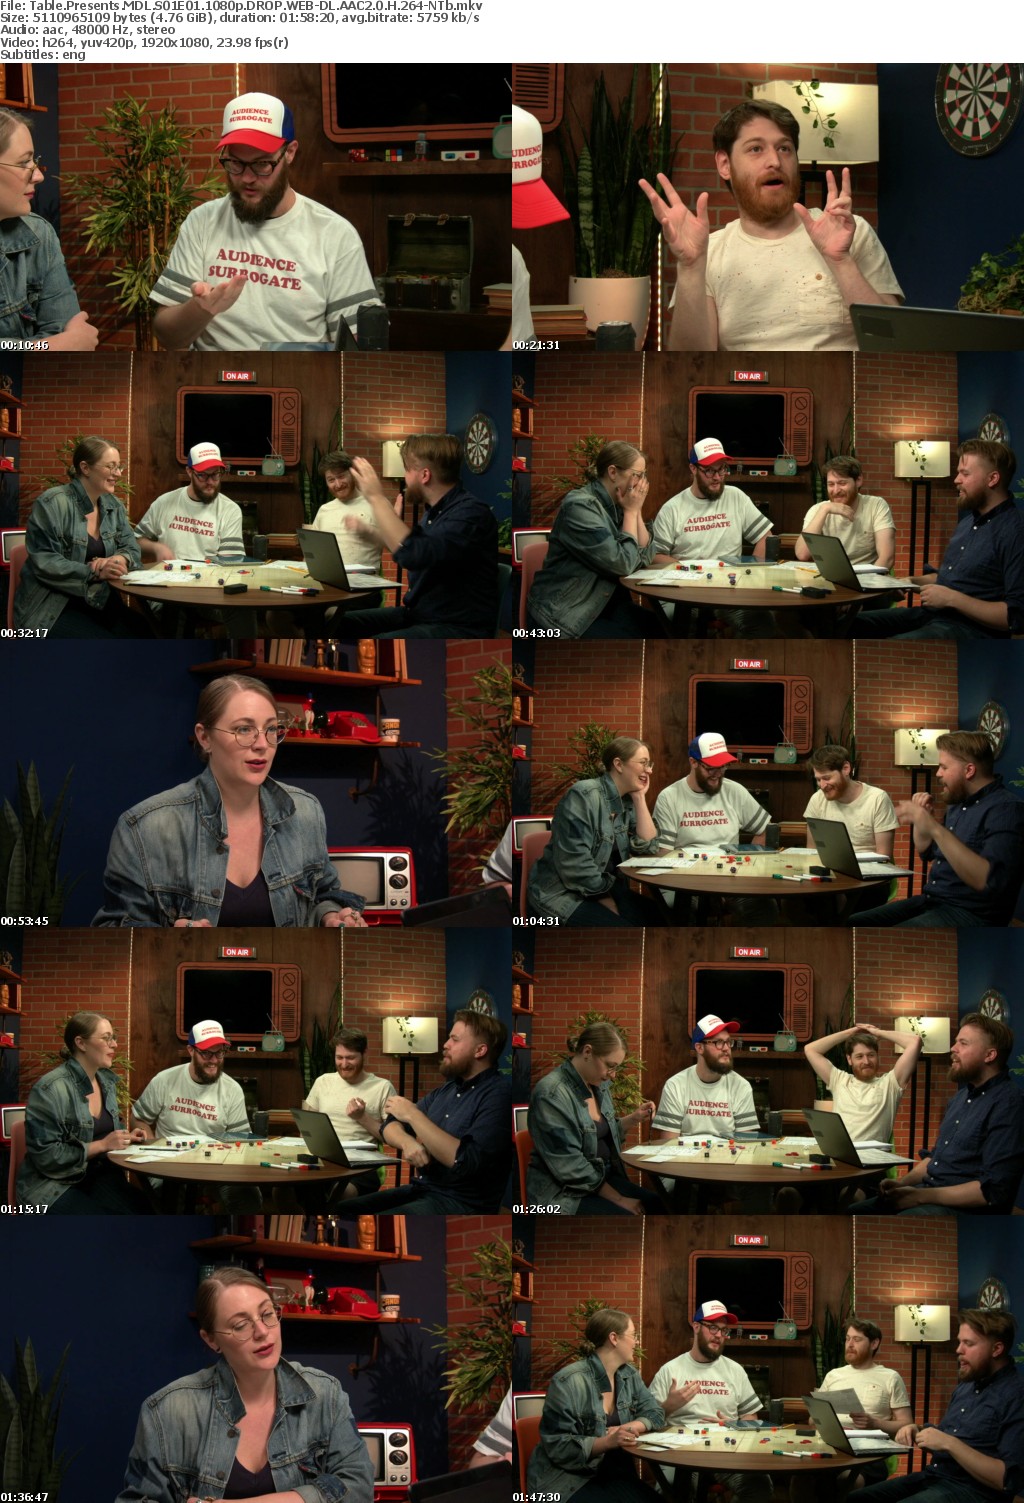 Table Presents MDL S01E01 1080p DROP WEB-DL AAC2 0 H 264-NTb